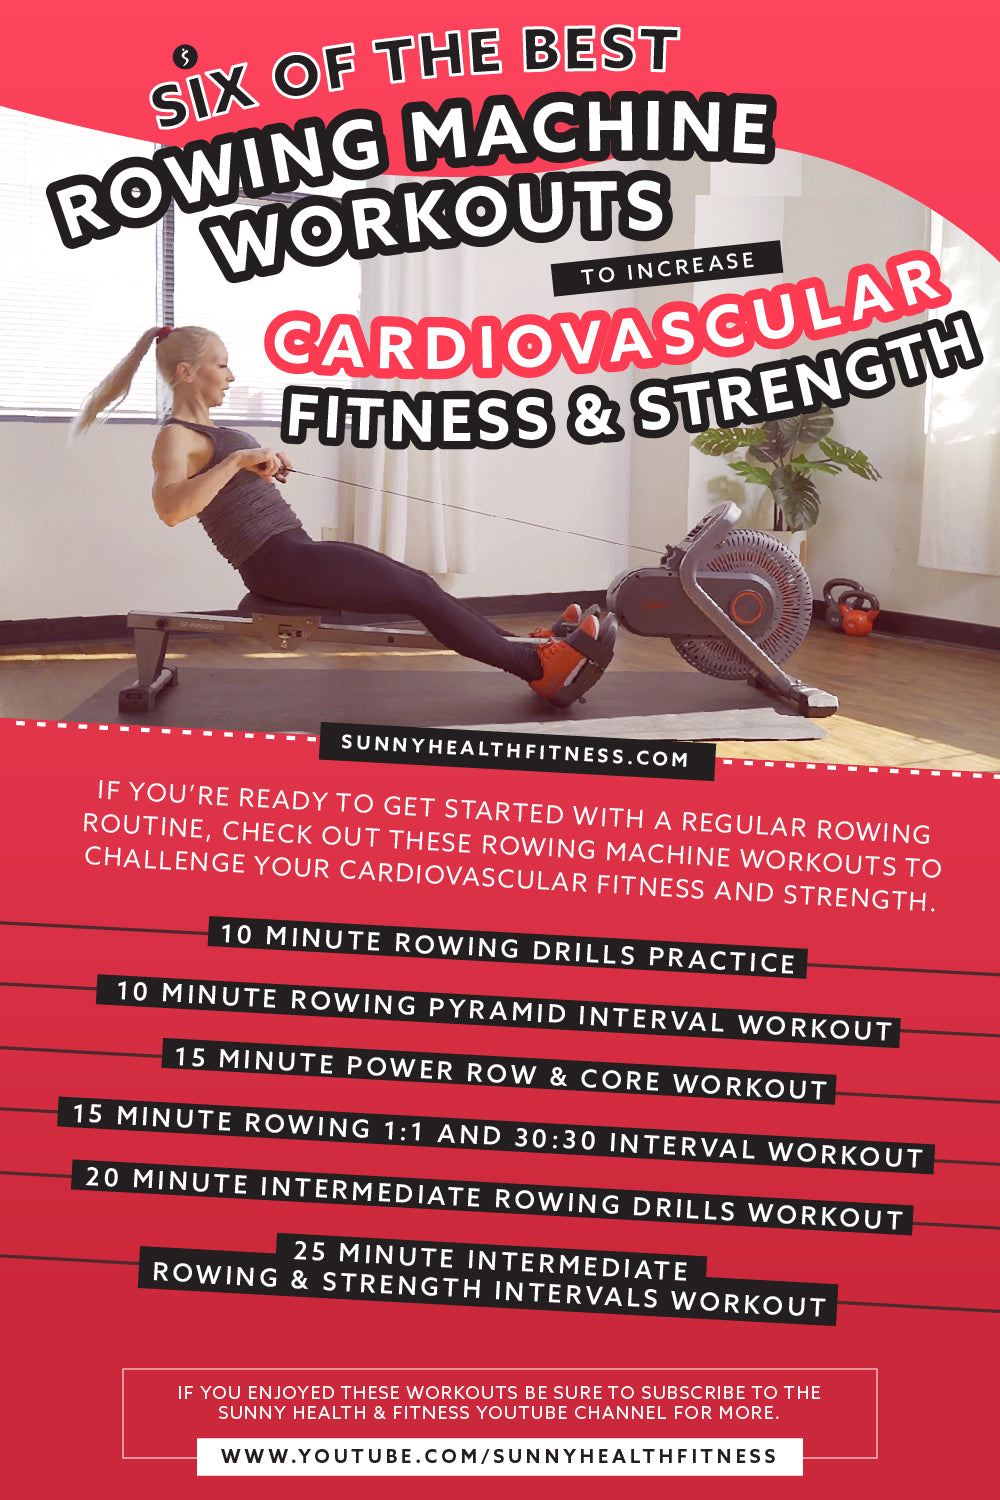 video noget ordlyd 6 of the Best Rowing Machine Workouts to Increase Cardiovascular Fitne